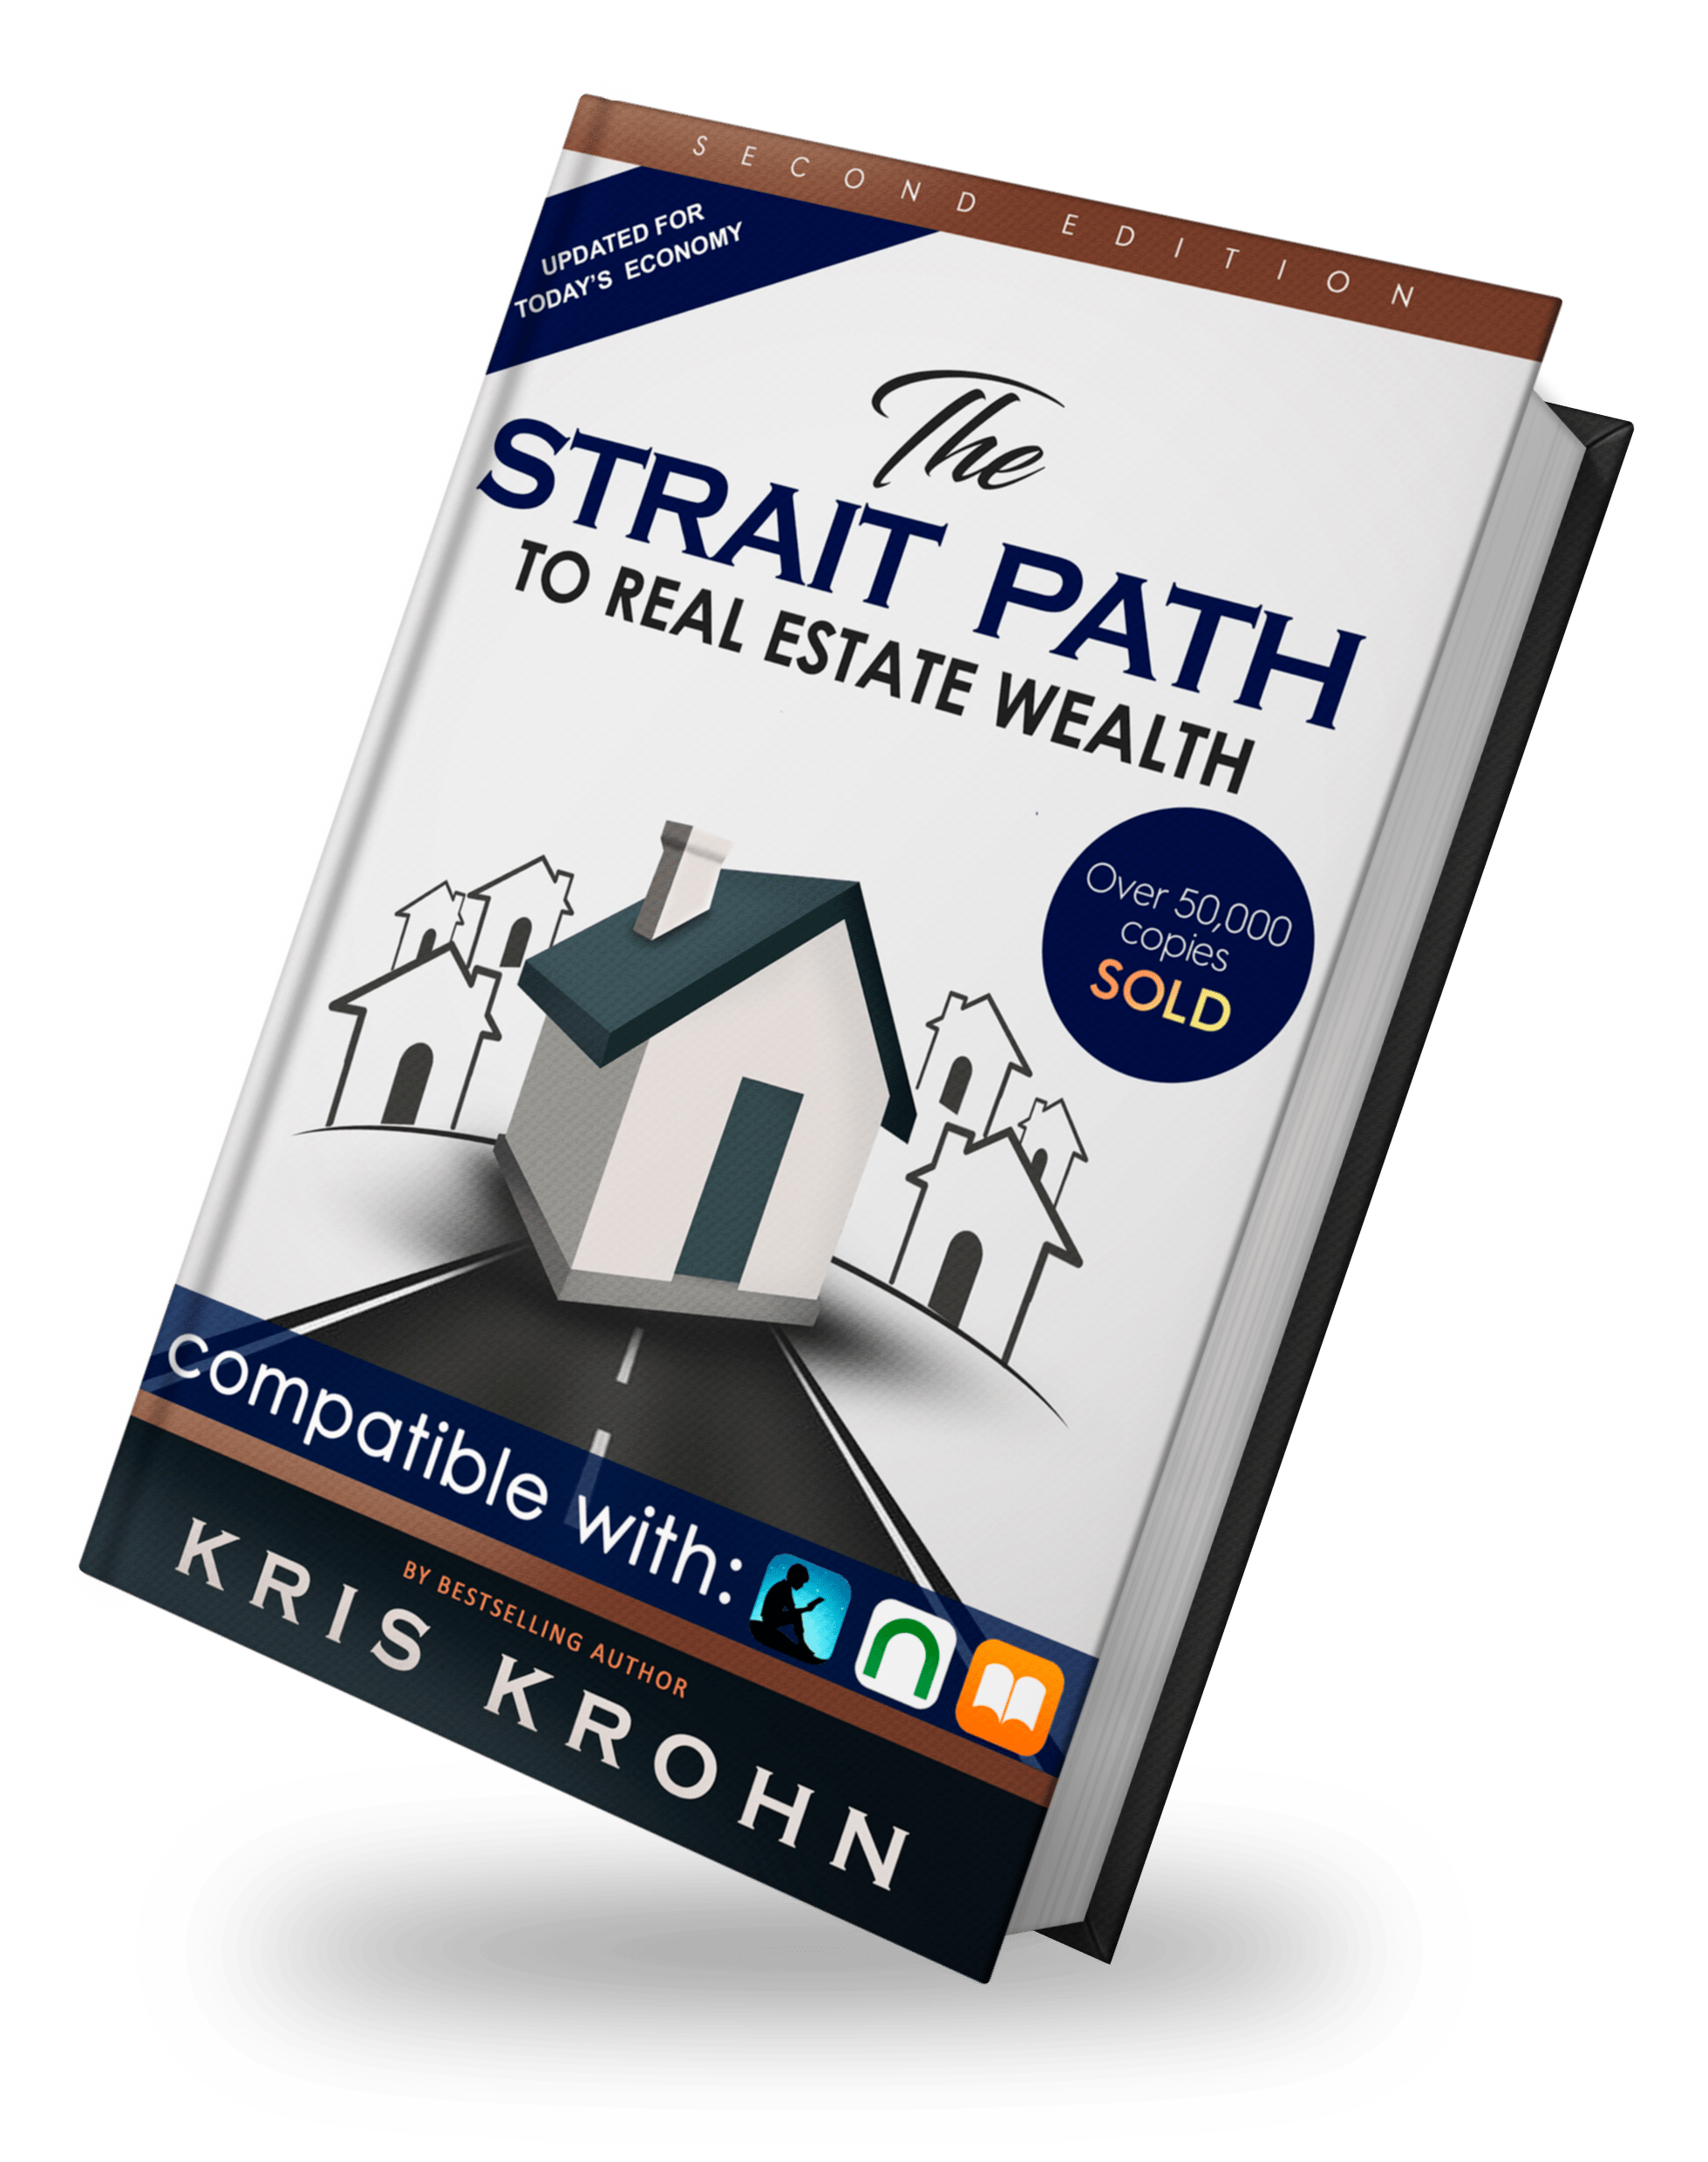 Strait path to real estate wealth book